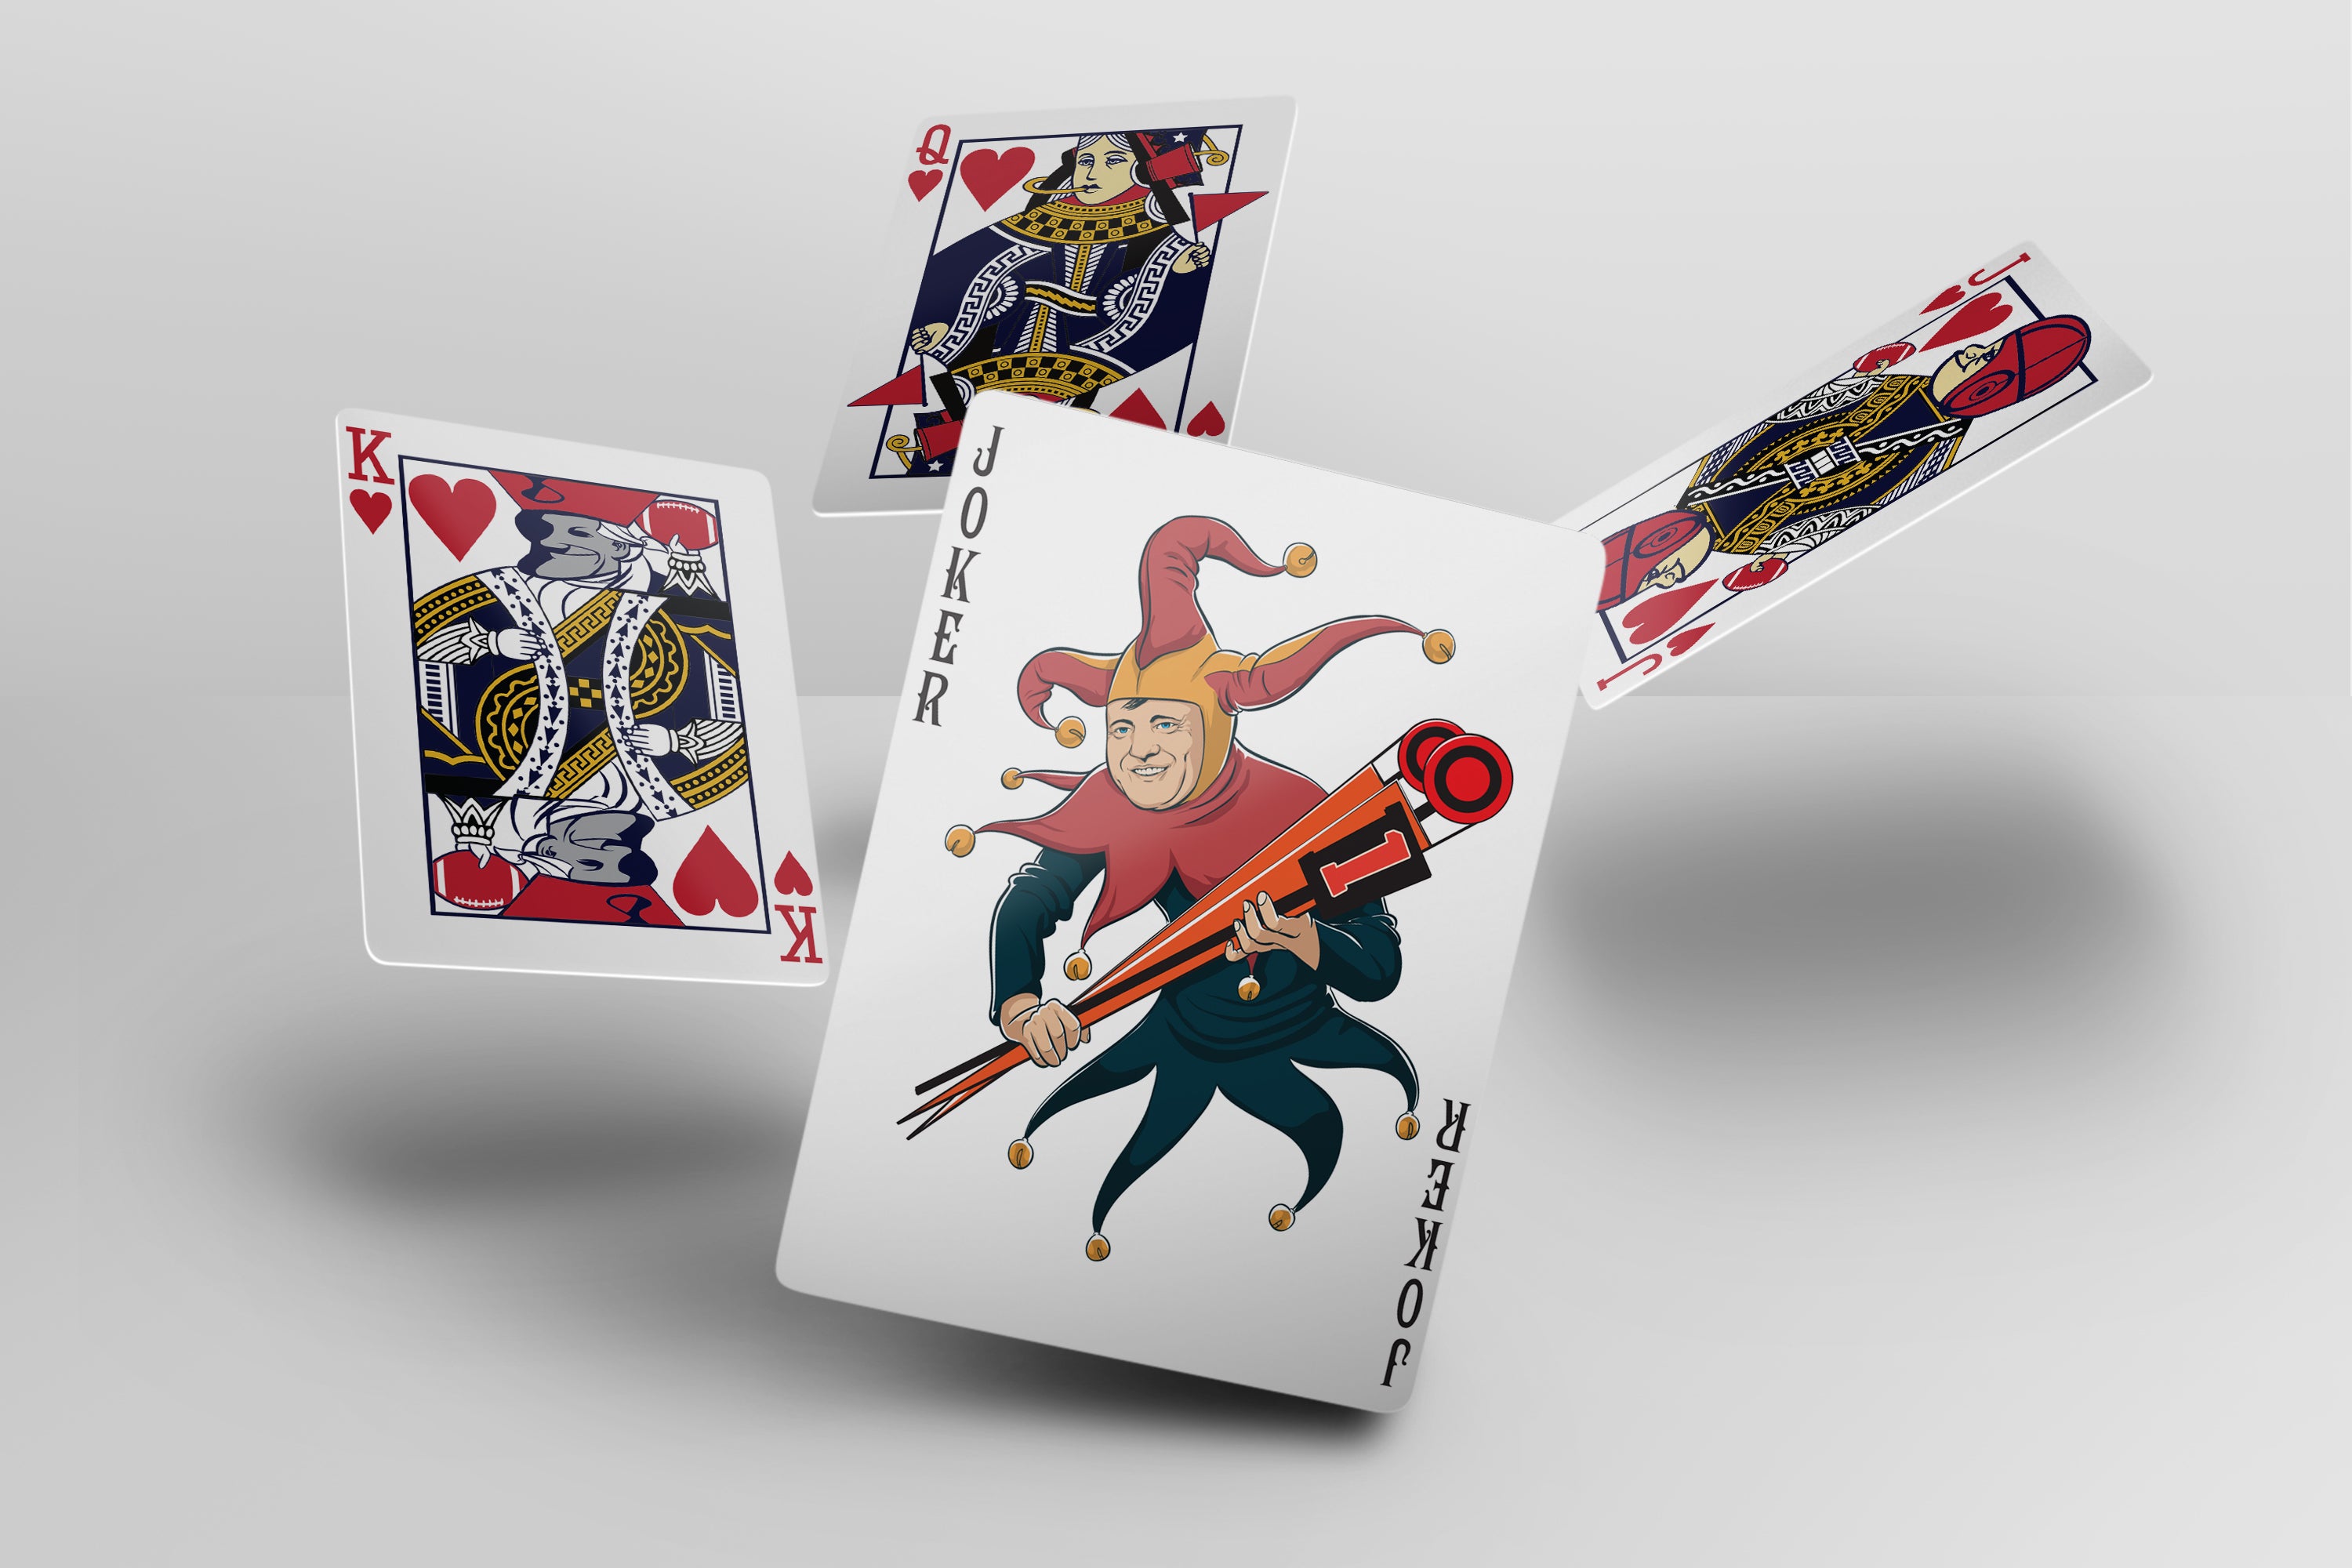 Boston Sports Playing Cards